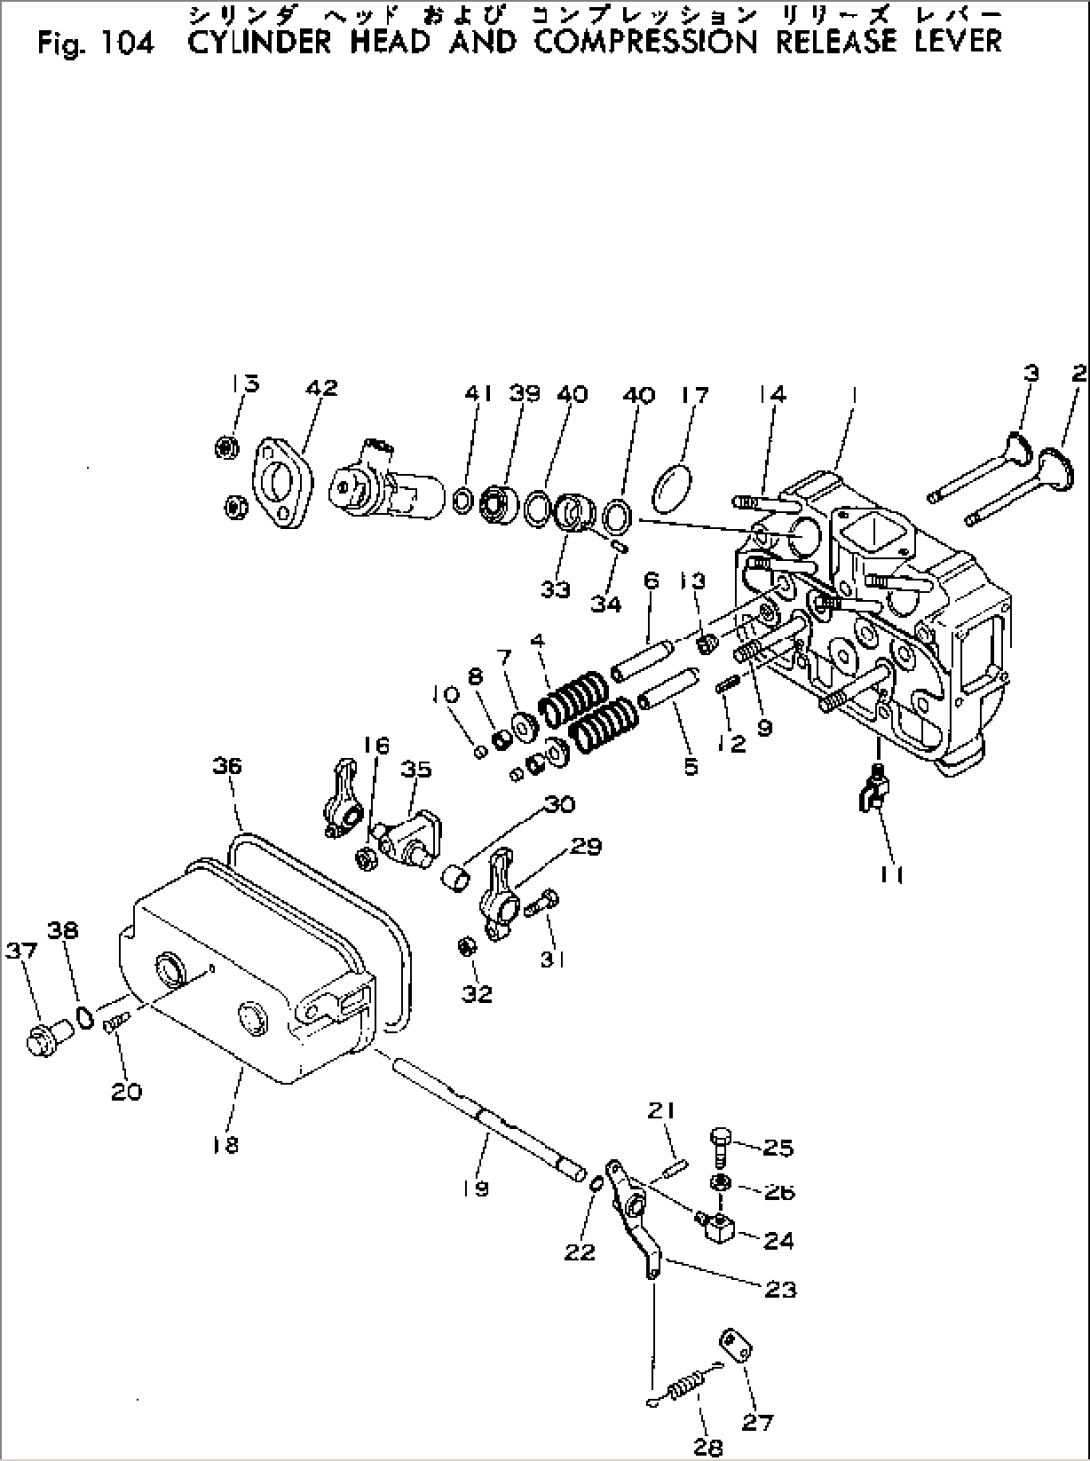 CYLINDER HEAD AND COMPRESSION RELEASE LEVER